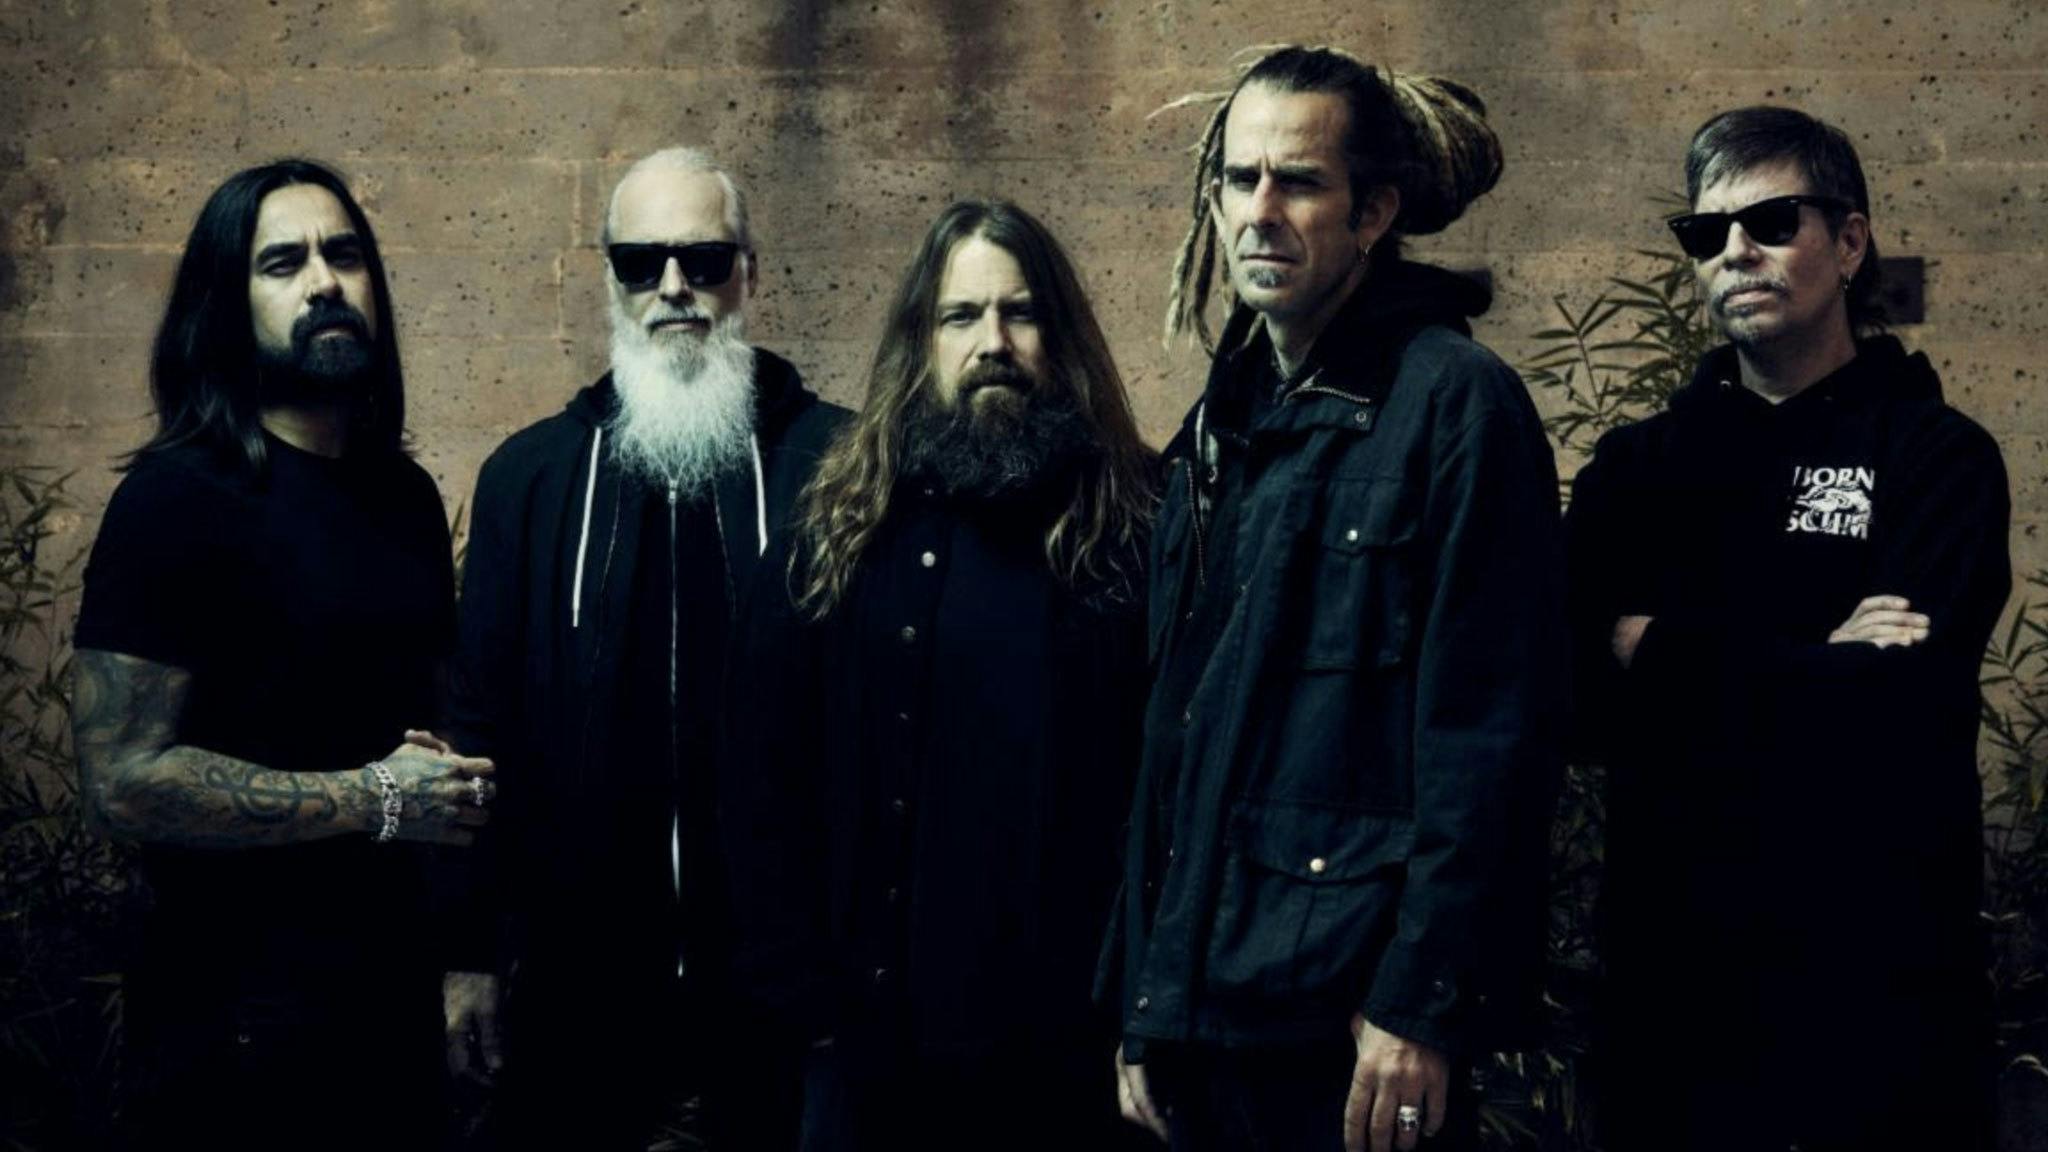 Here’s Lamb Of God’s setlist from their first UK tour in five years